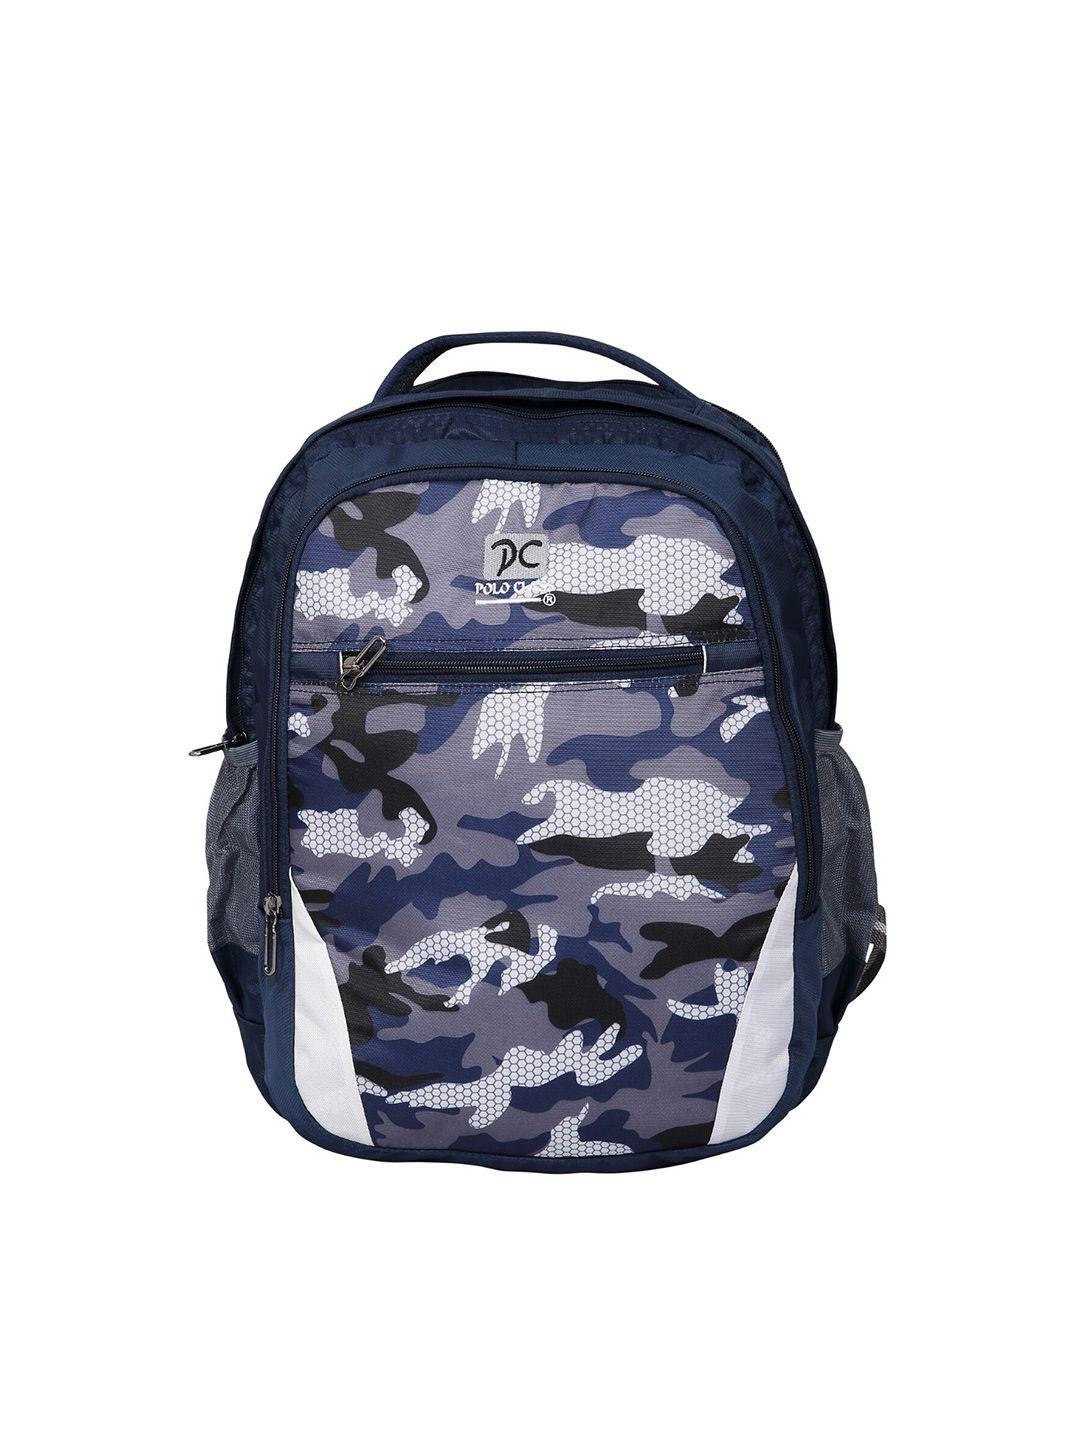 polo class laptop camouflage backpack